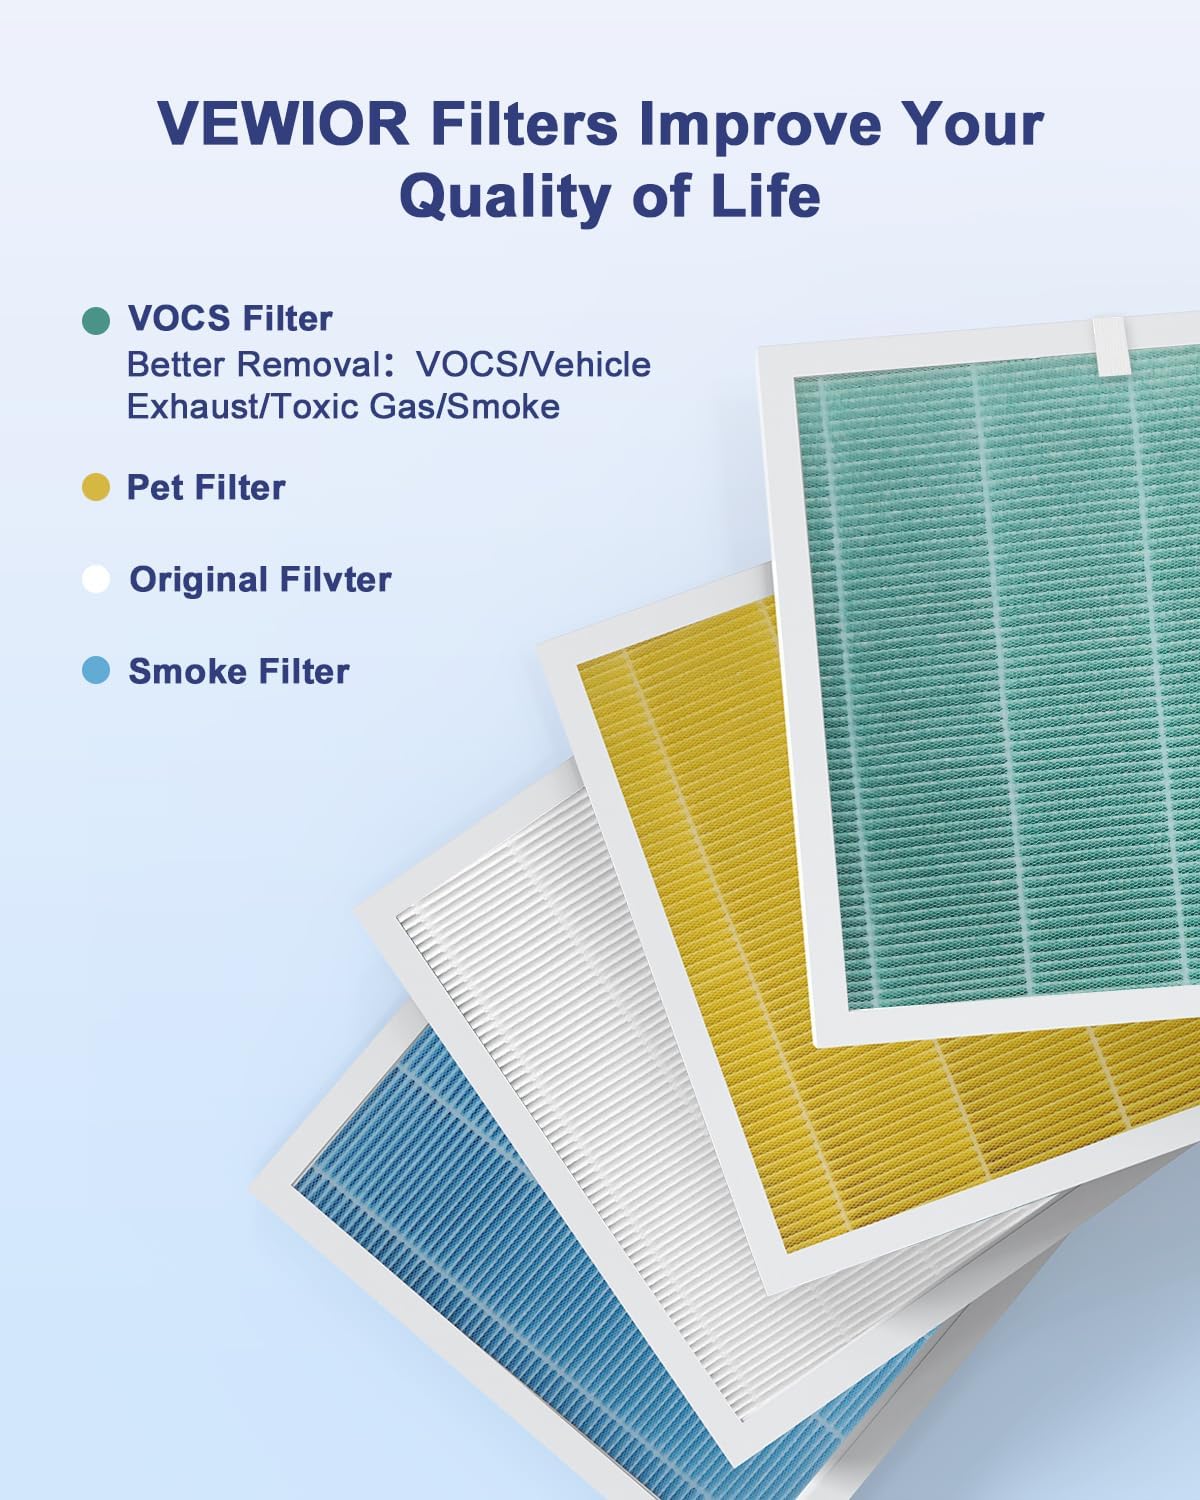 VEWIOR Official Replacement Filter True HEPA Replacement Filter, Compatible VEWIOR A3N Air Purifier, H13 True HEPA Filter for A3N Air Cleaner, VOCS Filter